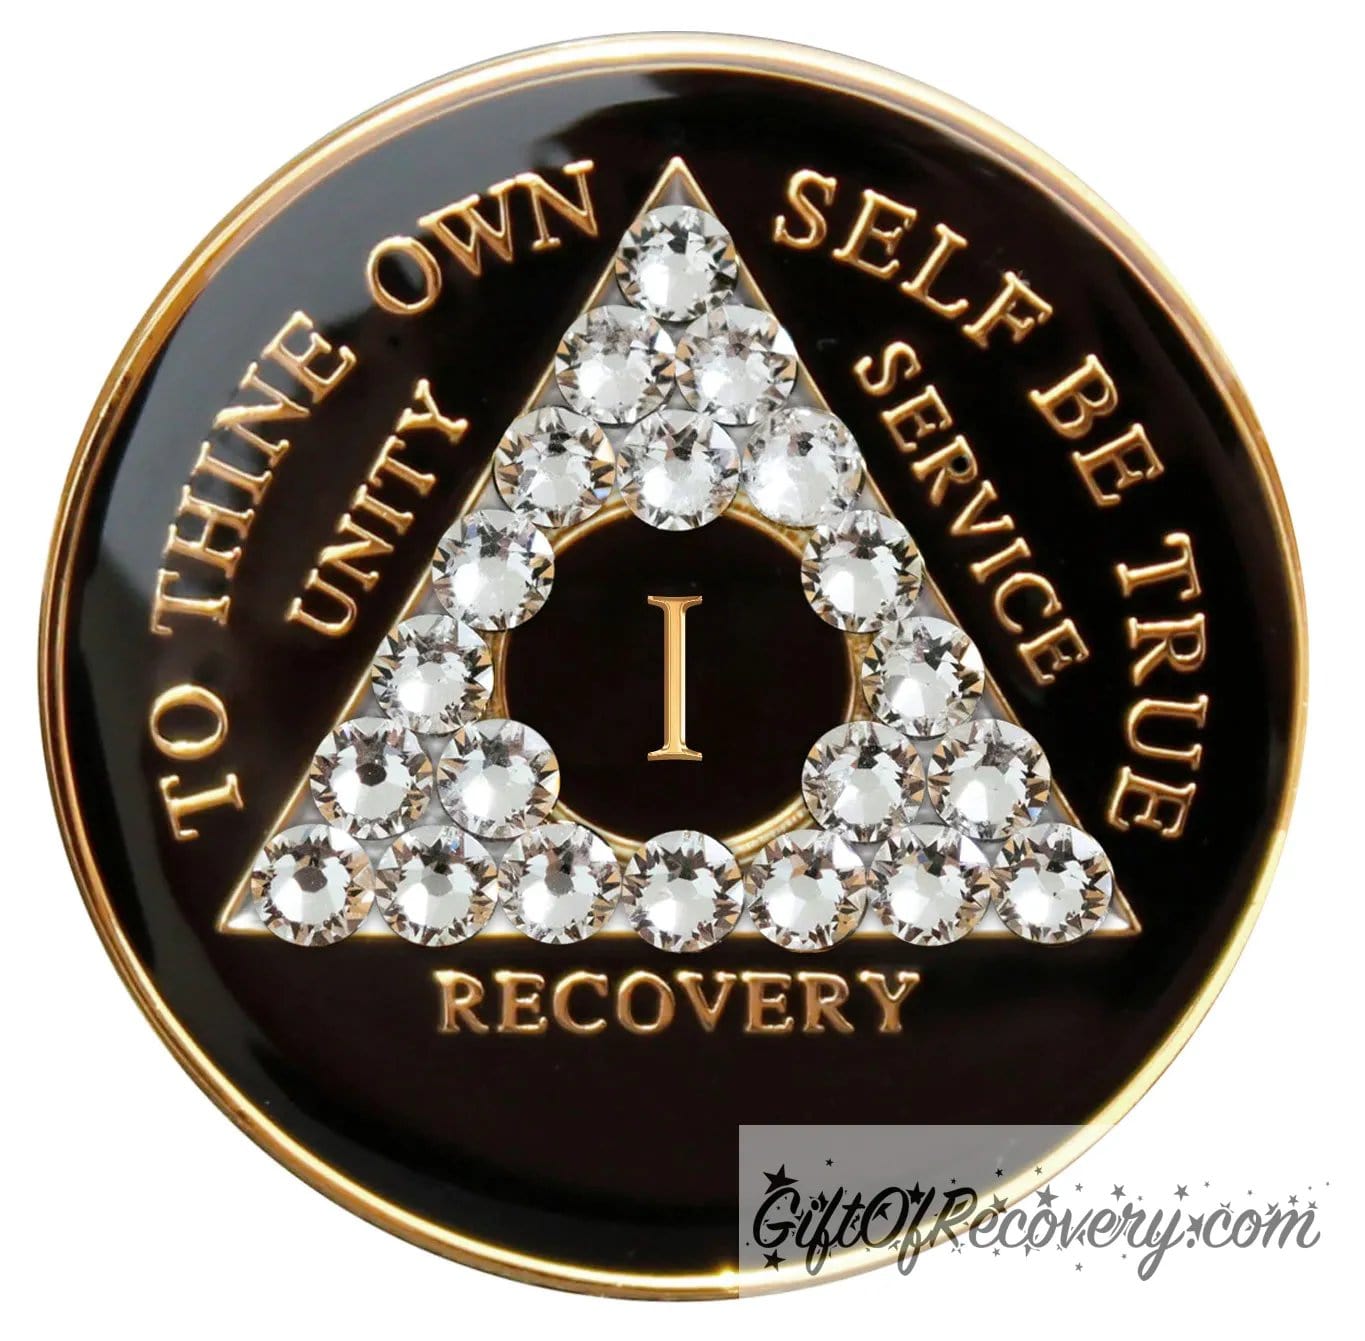 1 year AA medallion black onyx with 21 clear genuine crystals in the shape of the triangle, to thine own self be true, unity, service, recovery, and the roman numeral are embossed with 14k gold-plated brass, the recovery medallion is sealed with resin for a glossy finish that will last and is scratch proof.